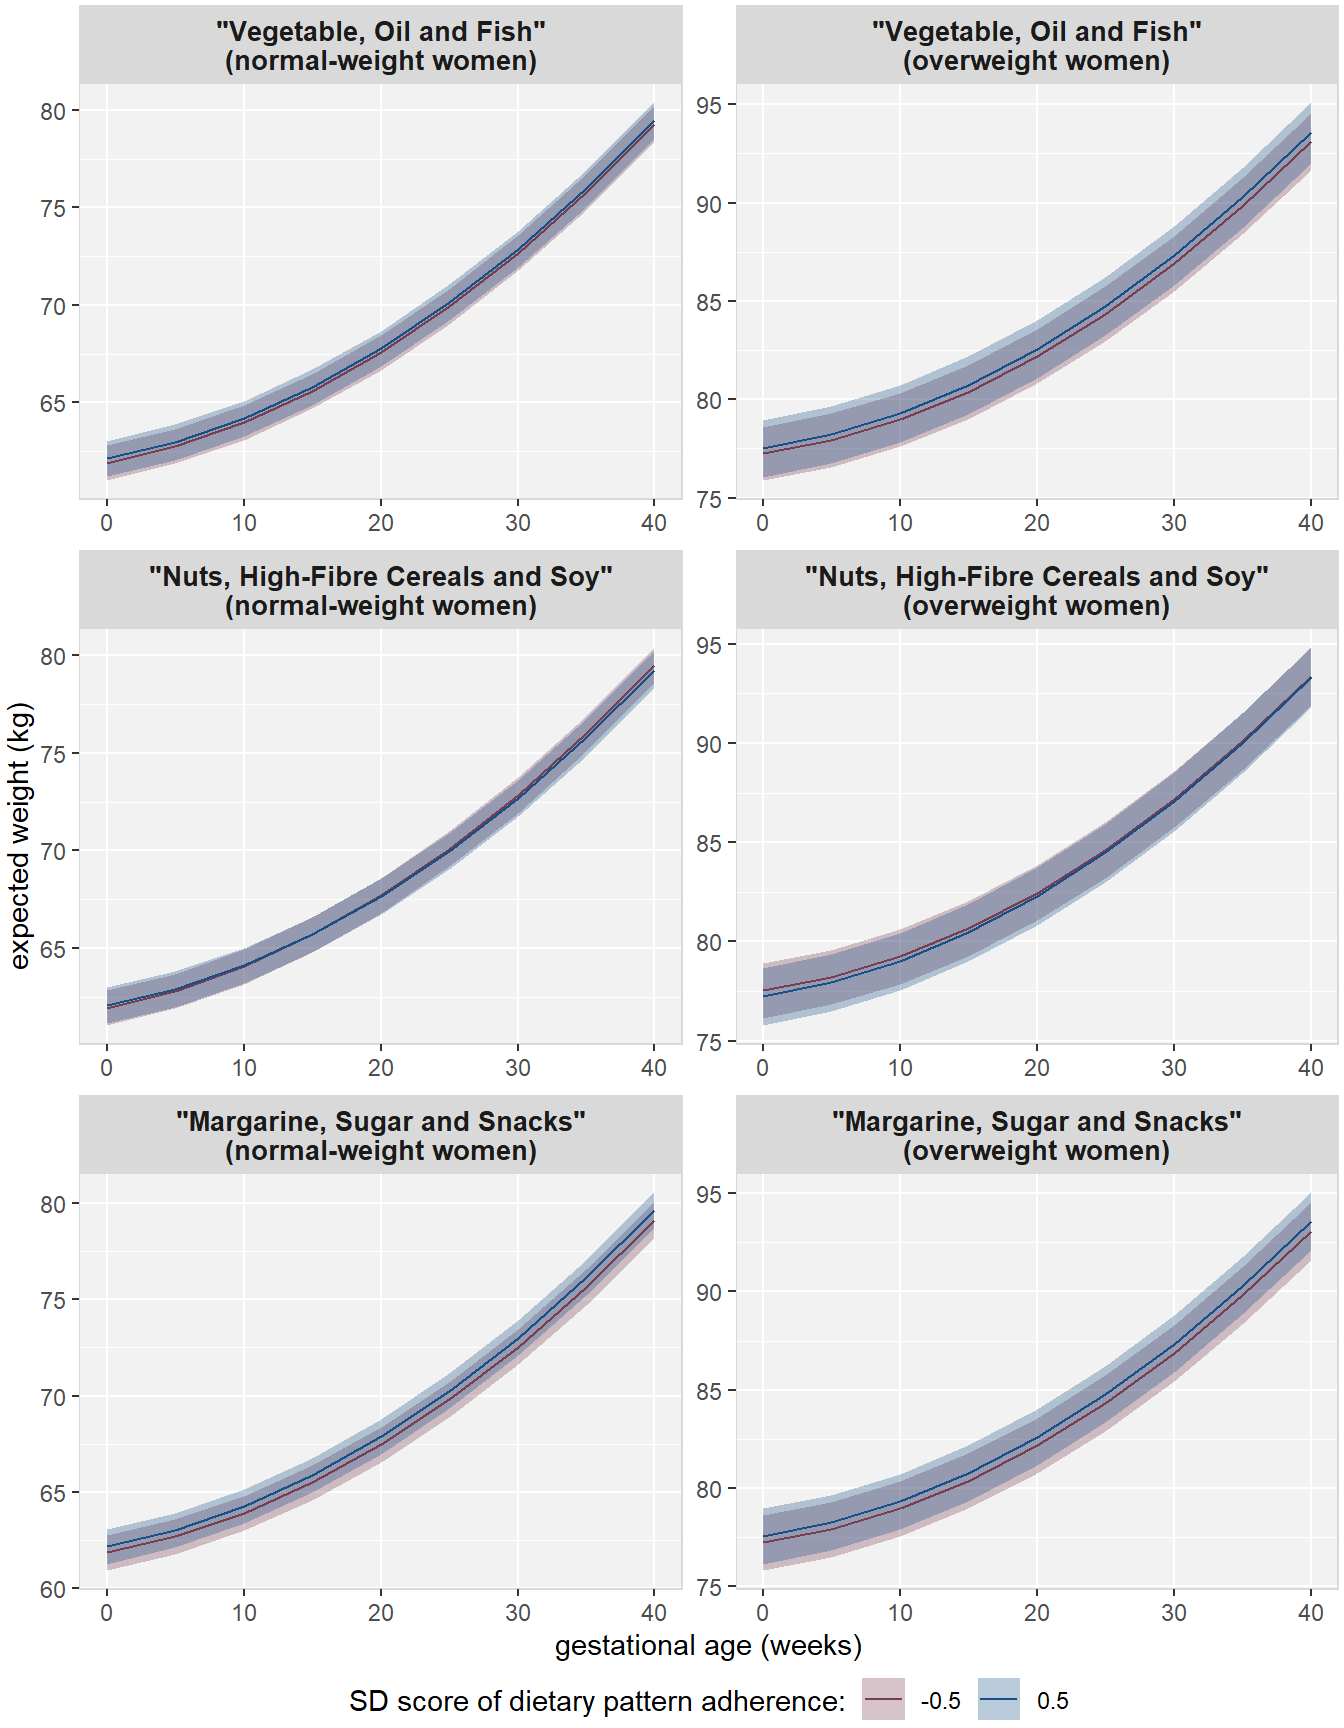 Visualization of the effect of diet on gestational weight over time.
Shown are the expected value and corresponding
95\% CIs for hypothetical cases that have either -0.5 or 0.5 SDS for adherence to
the respective dietary pattern and reference values for the other patterns and confounders.